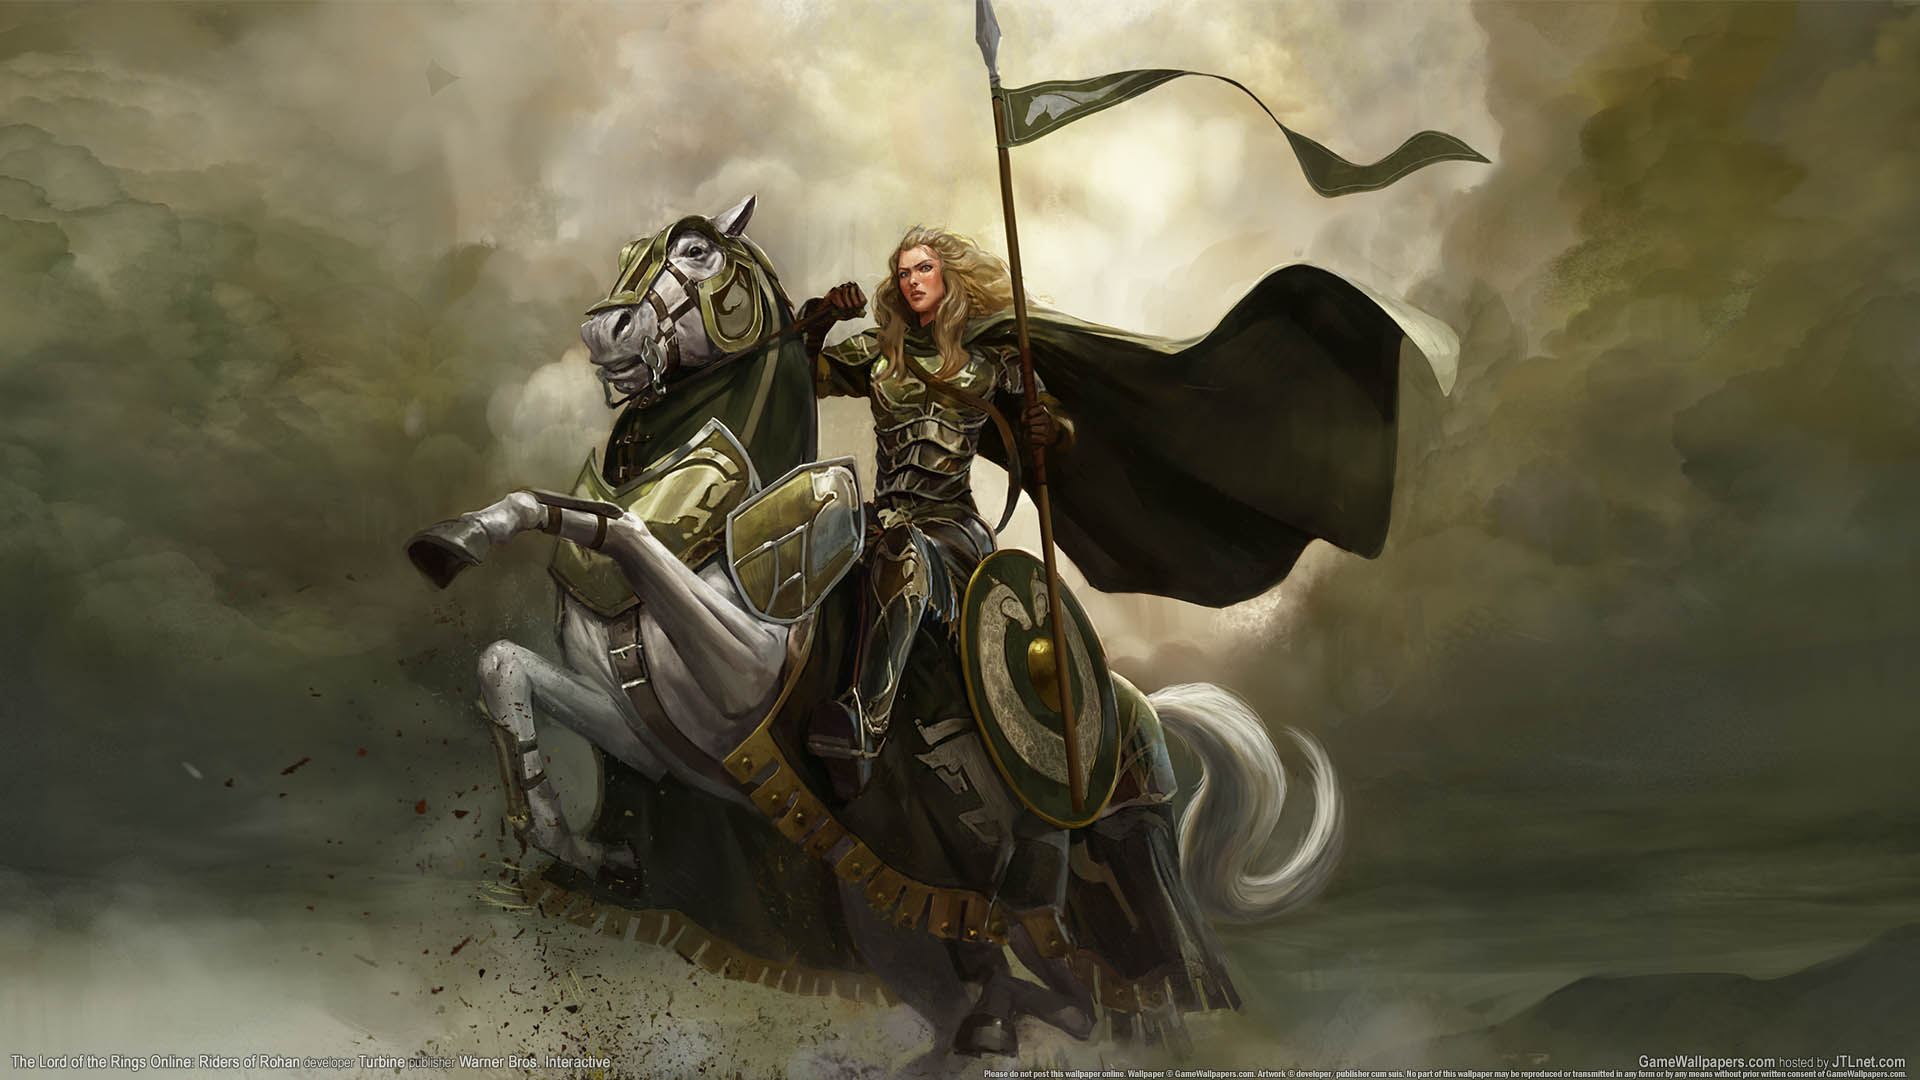 The Lord of the Rings Online: Riders of Rohan fond d'cran 02 1920x1080